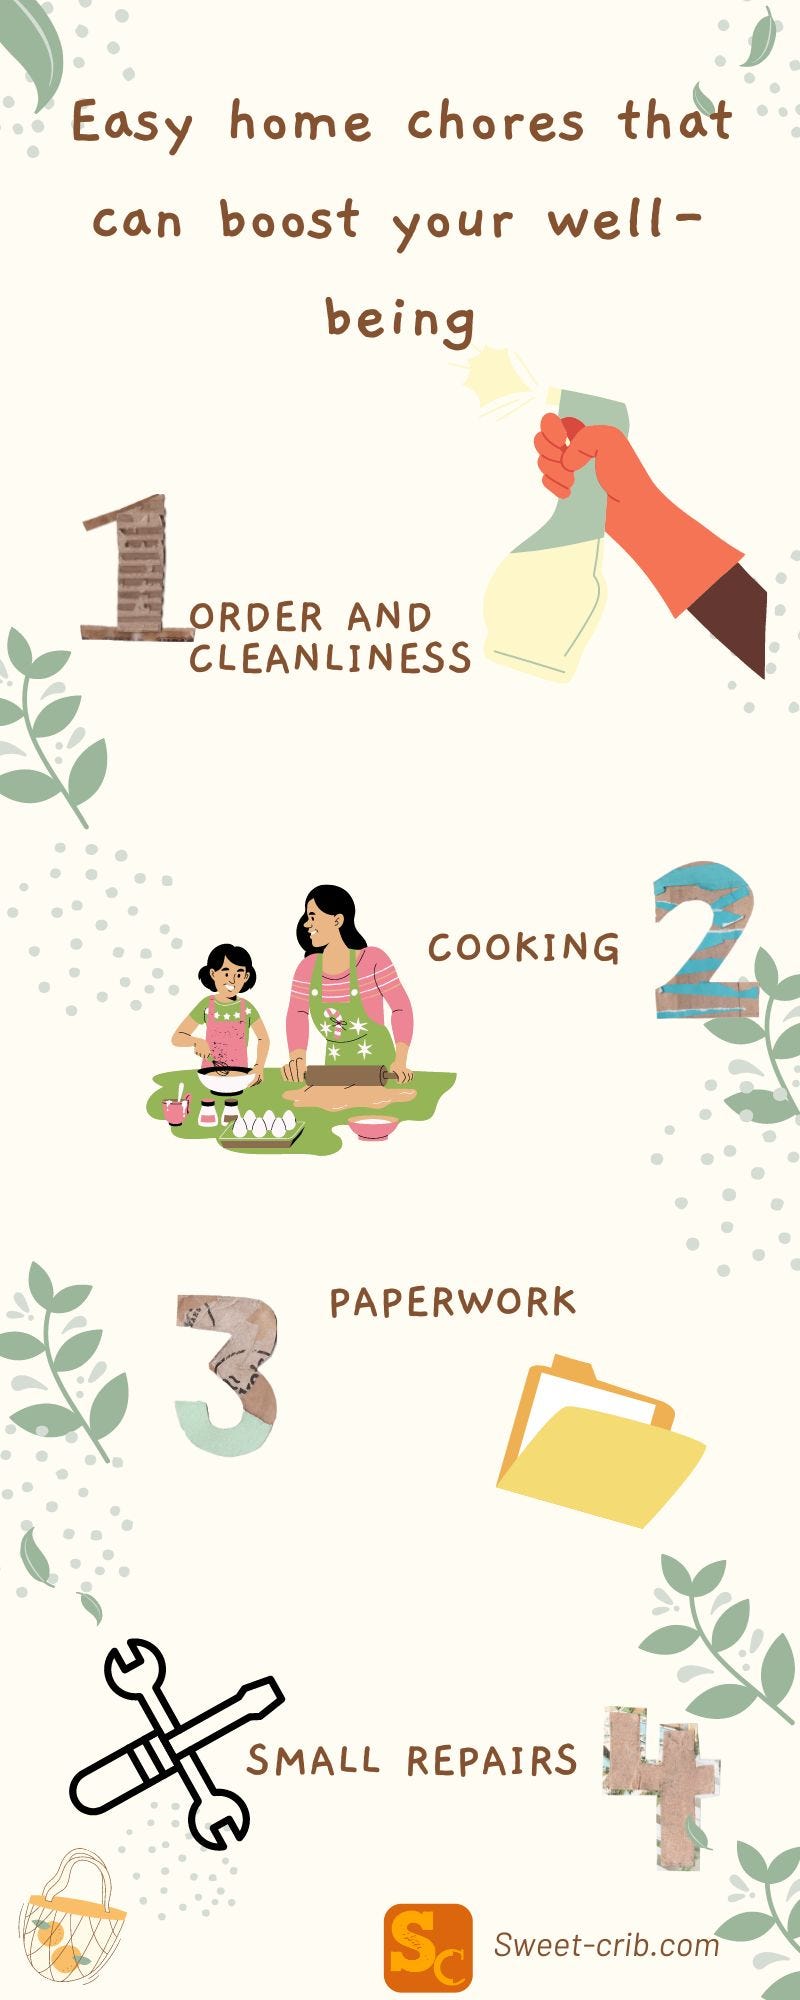 Home Chores That Can Boost Your well-being